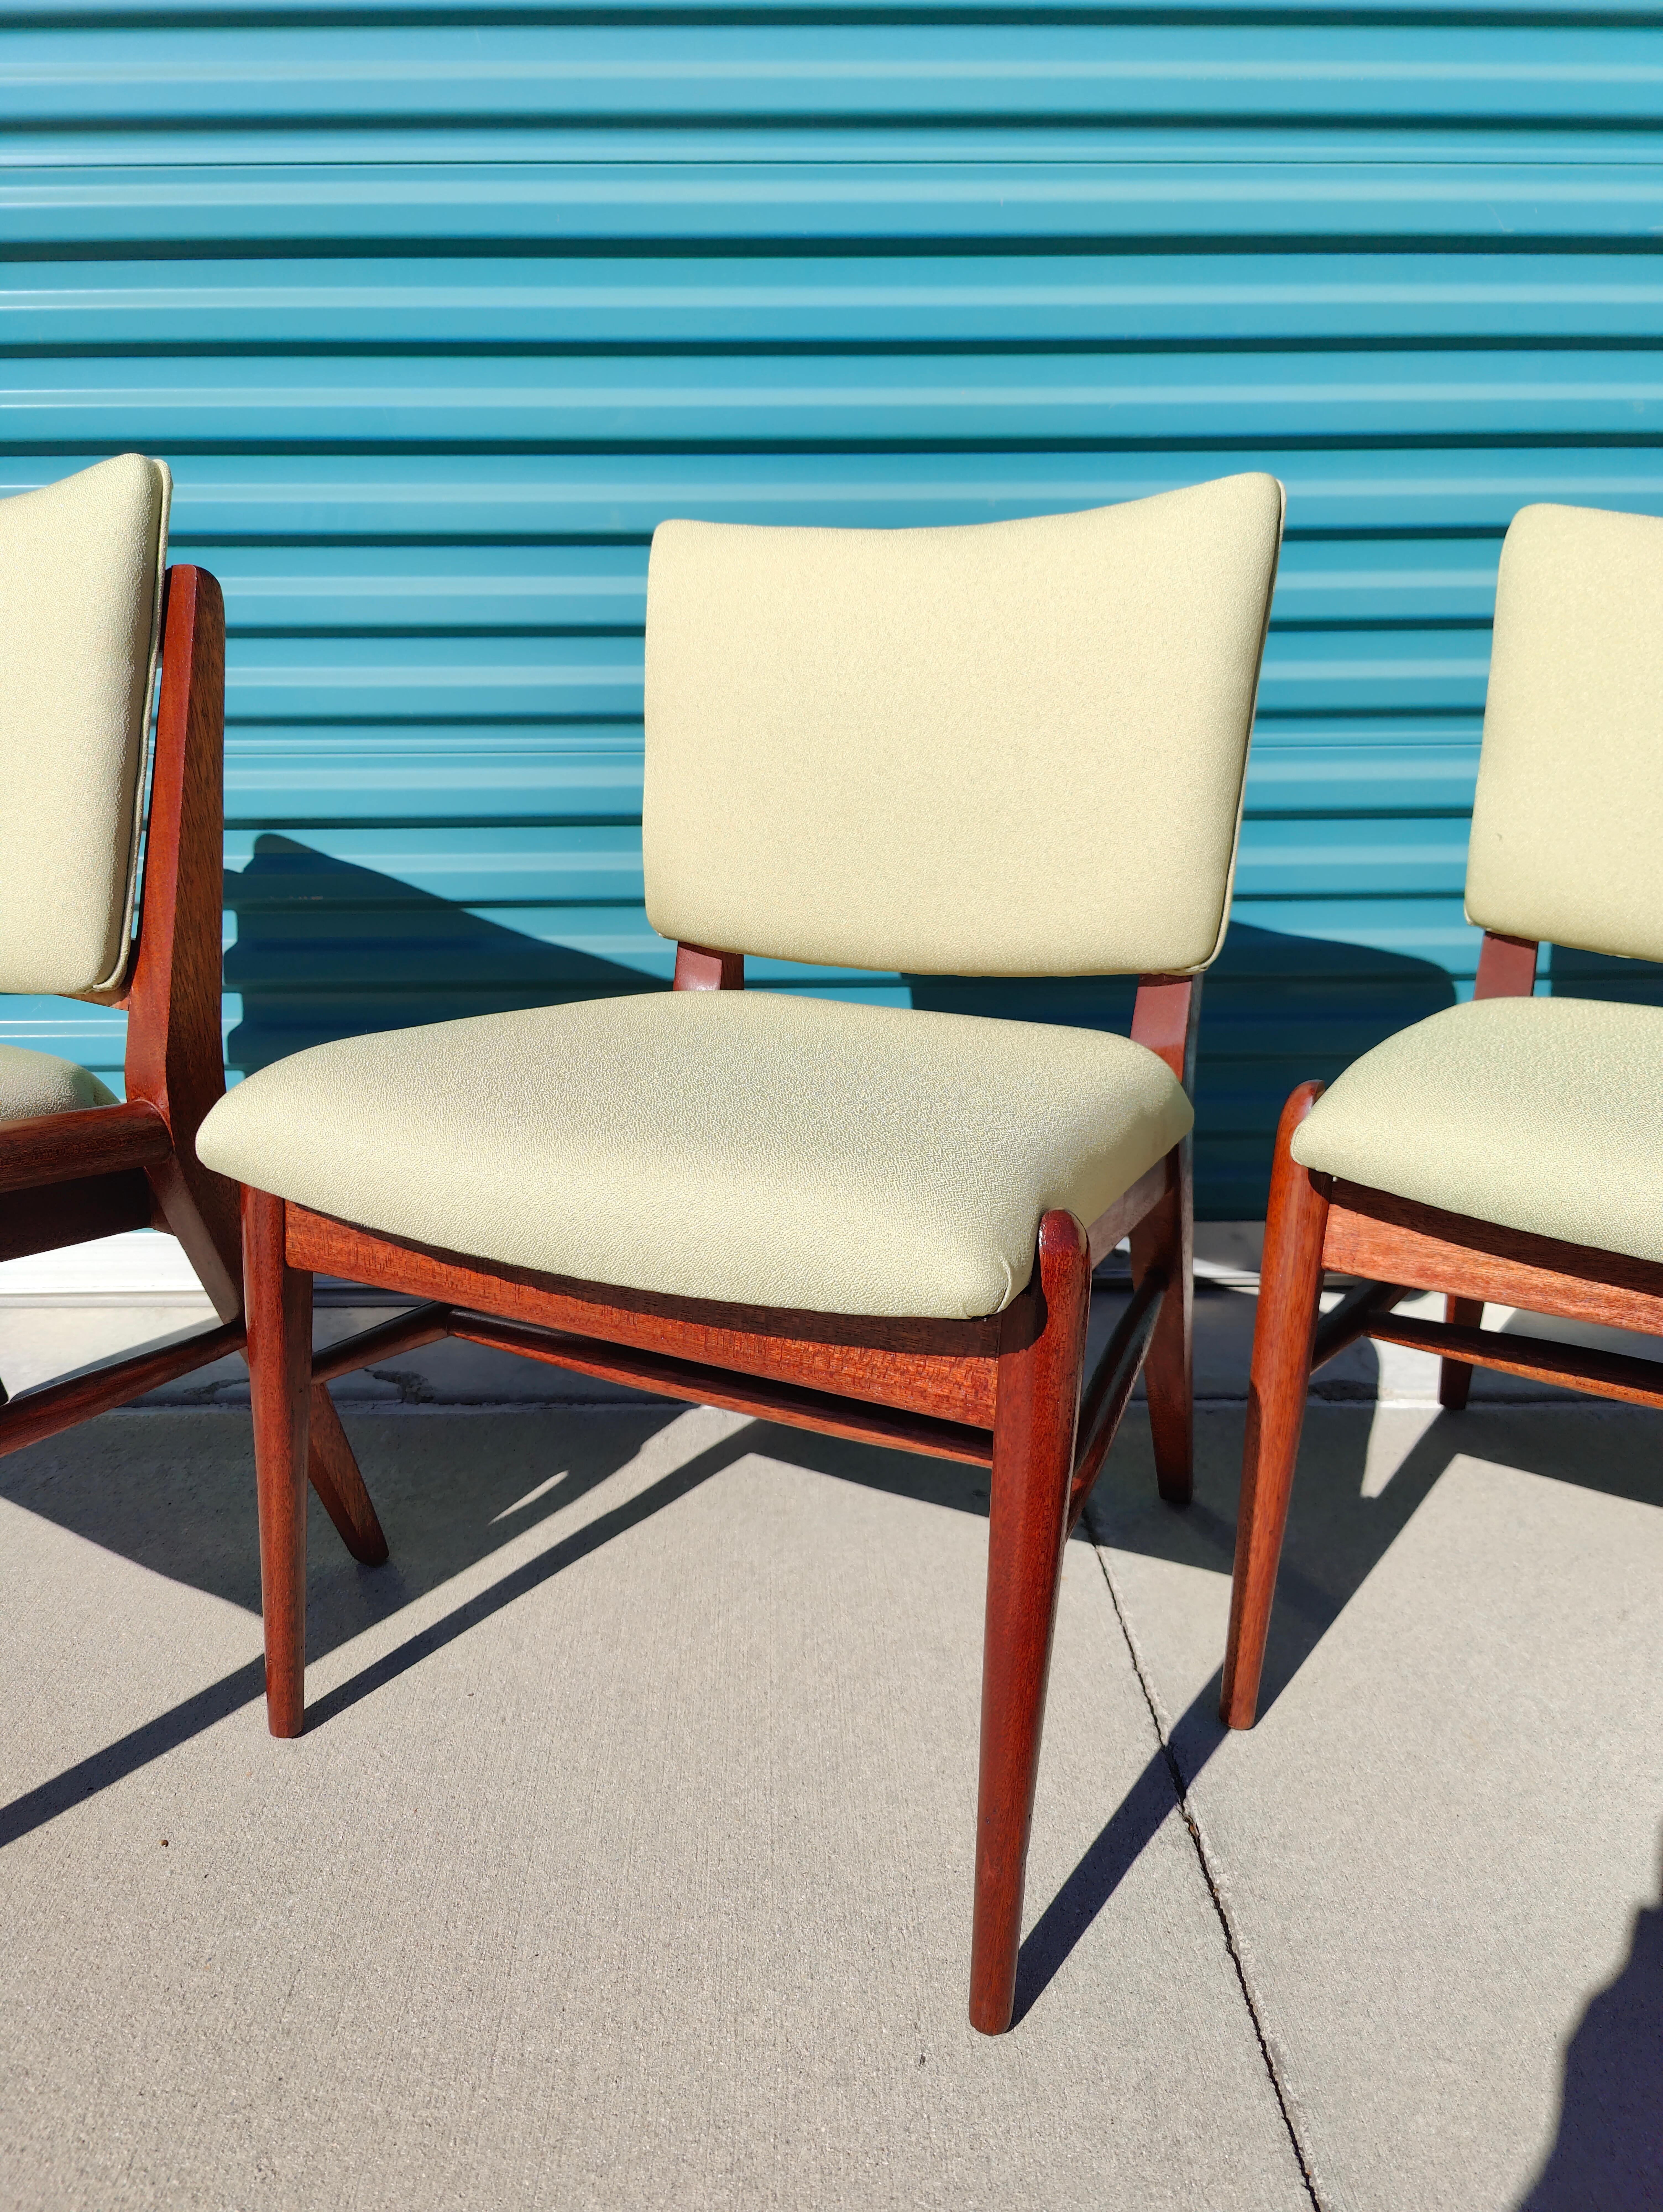 Vintage Mid-Century Modern Mahogony Chairs by Brown Saltman For Sale 8